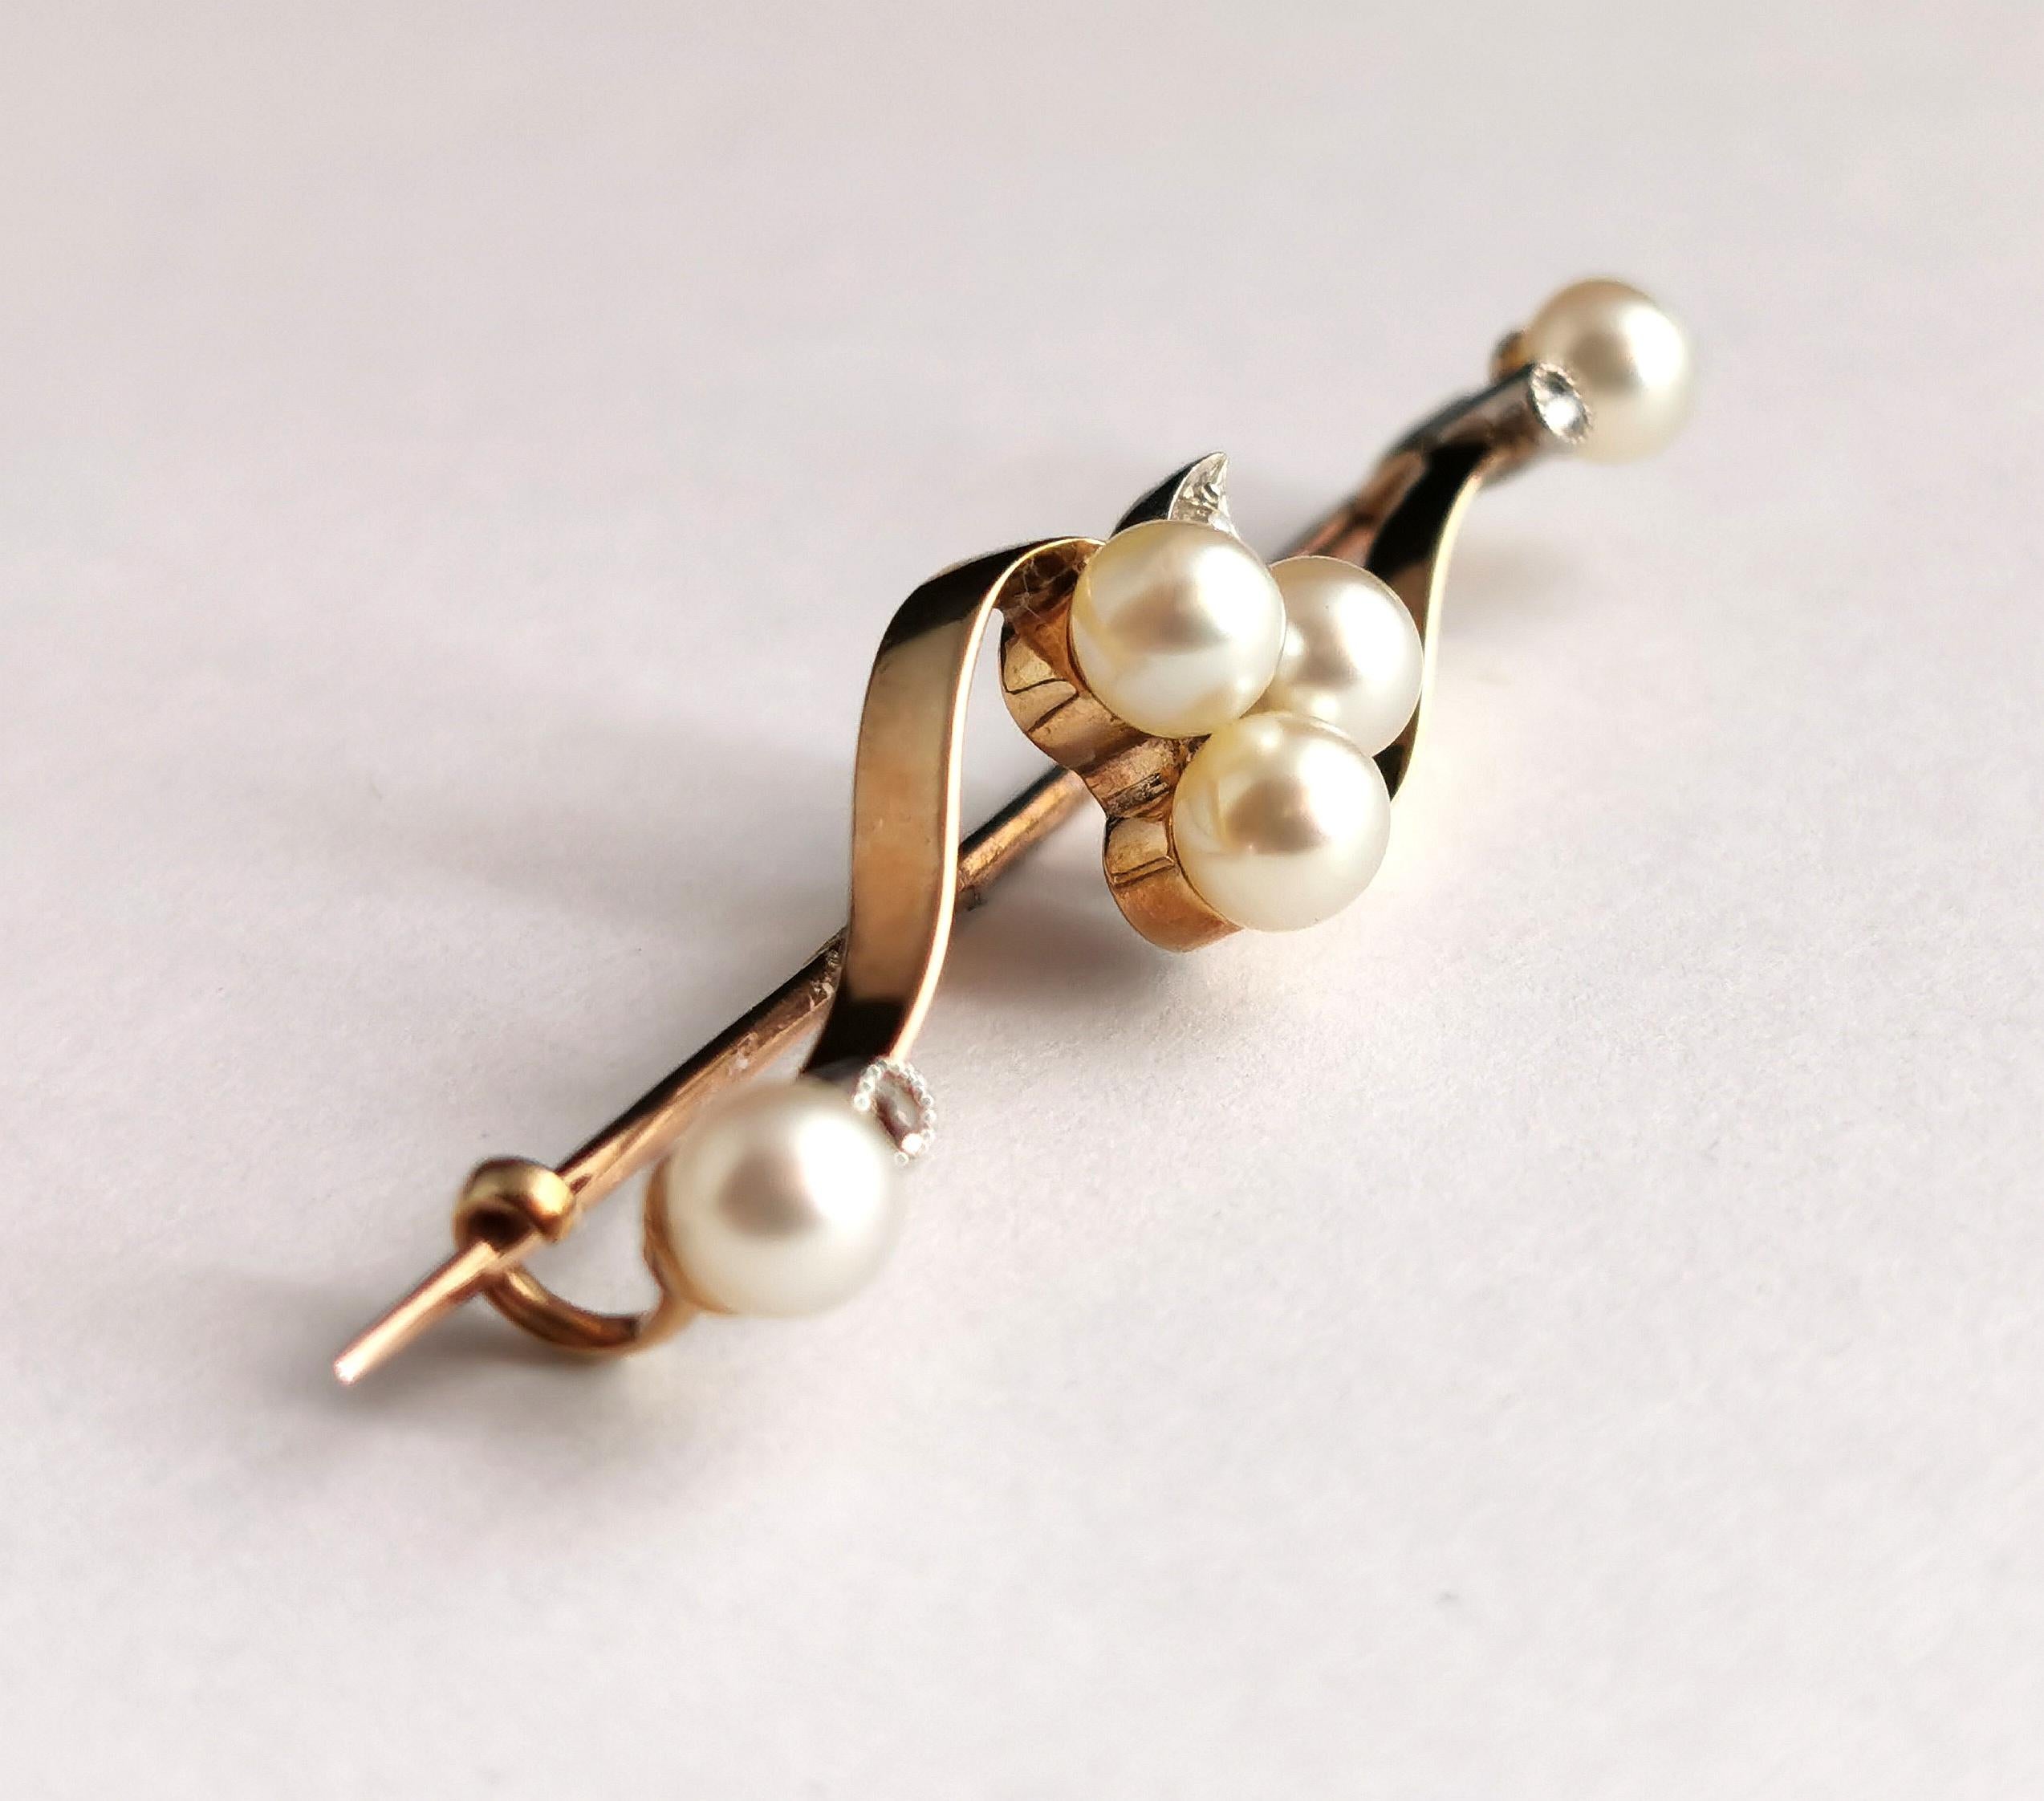 Antique Diamond and Pearl Shamrock Brooch, 9k Gold and Silver 11